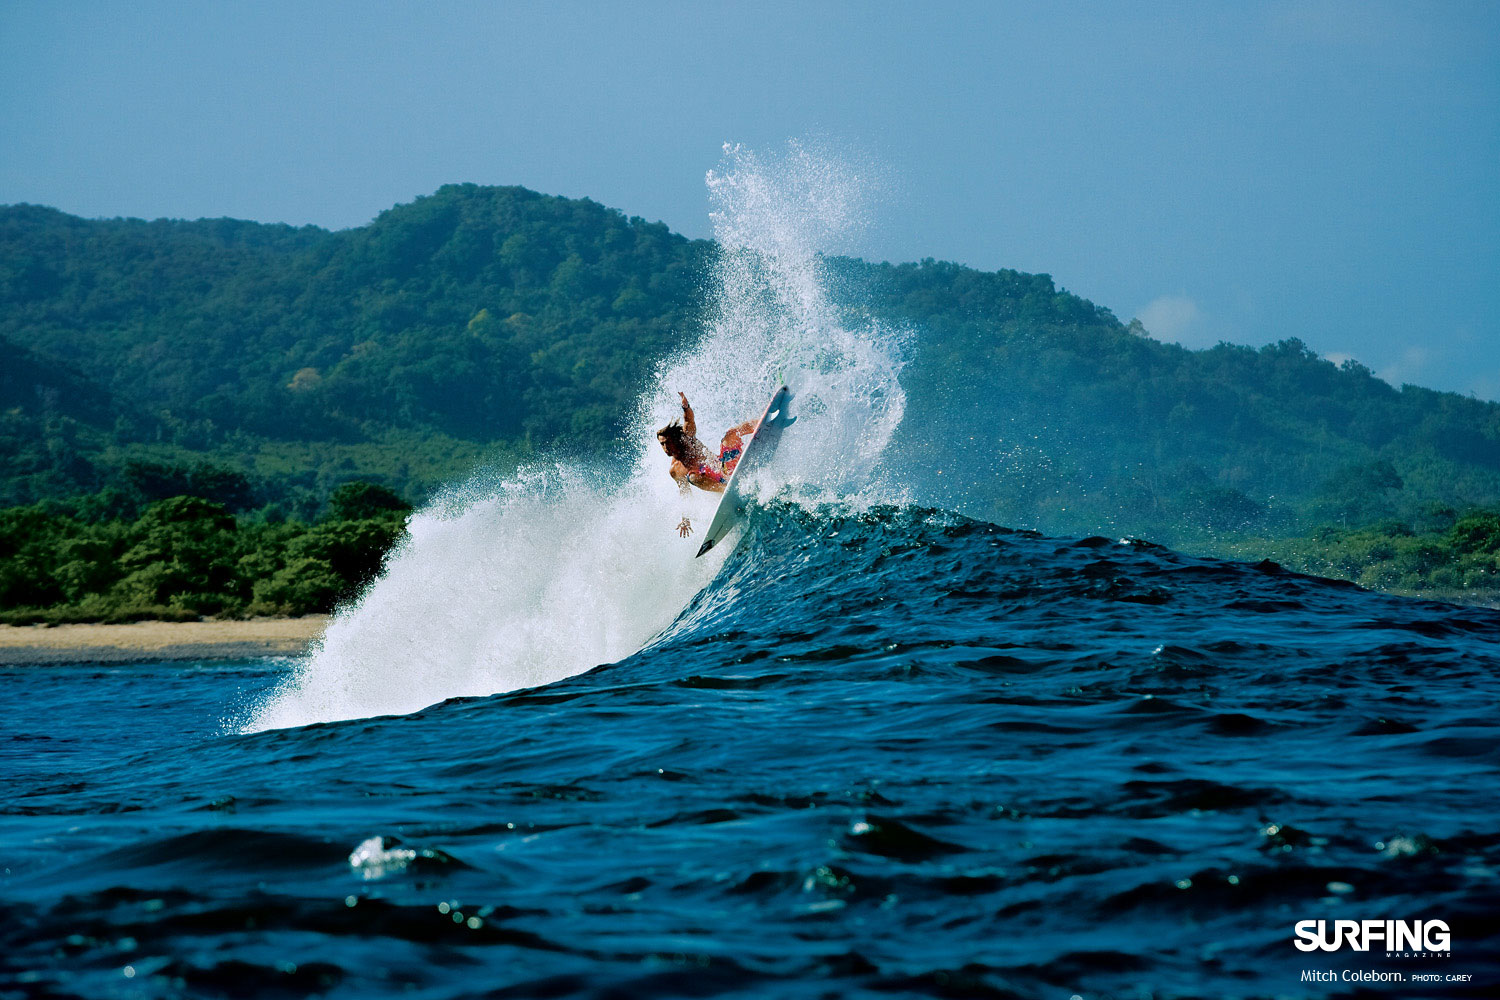 Desktop Wallpapers/Awesome Photos from Surfing Magazine | SURFBANG